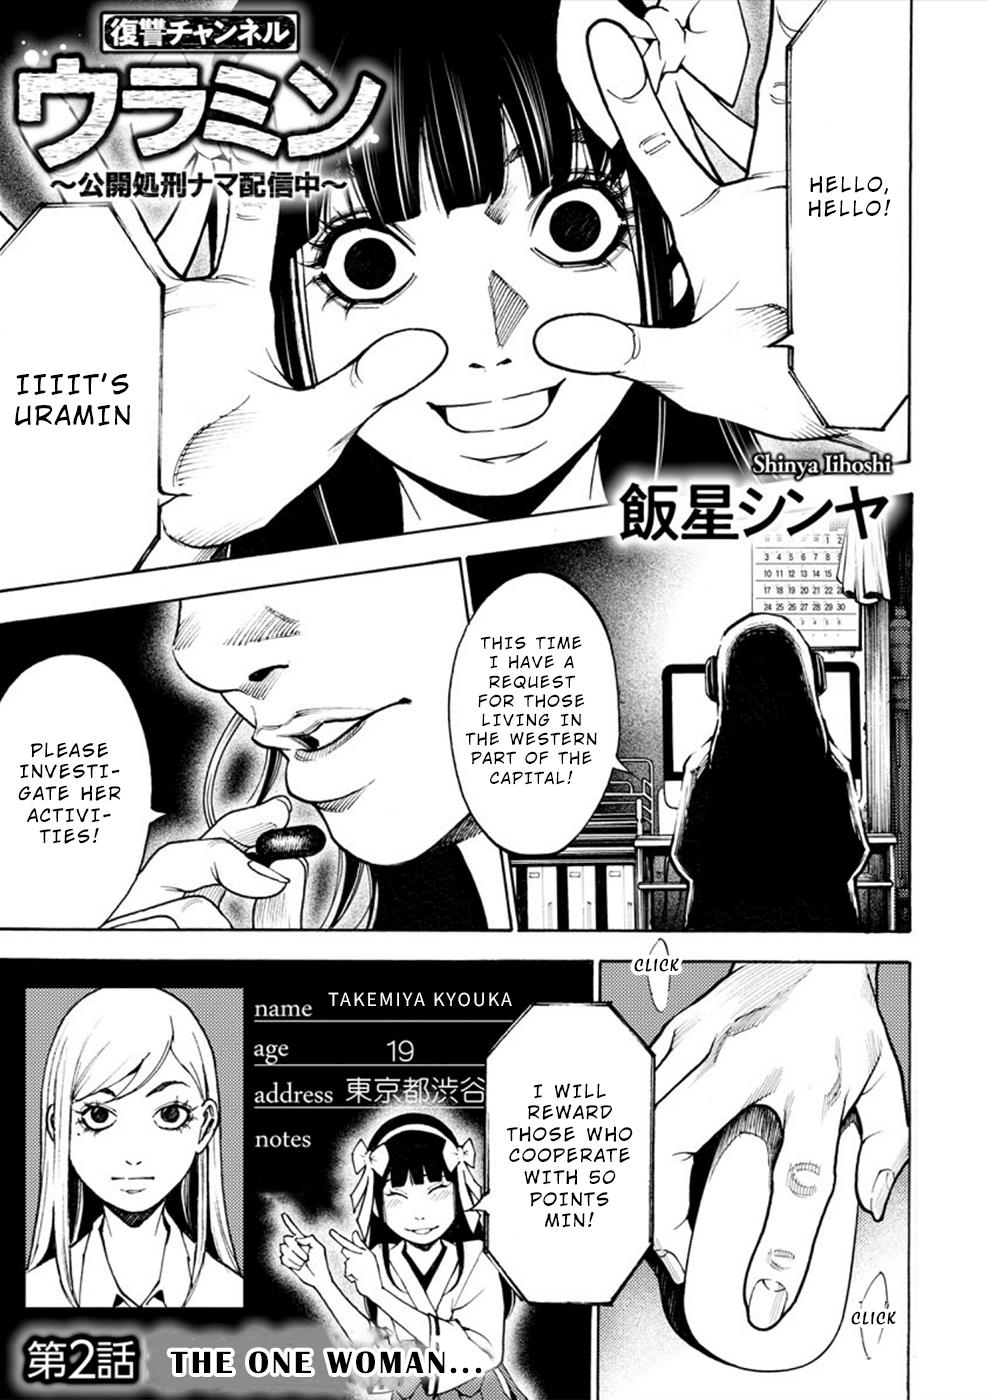 Revenge Channel Uramin Vol.1 Chapter 2: The One Woman... - Picture 1